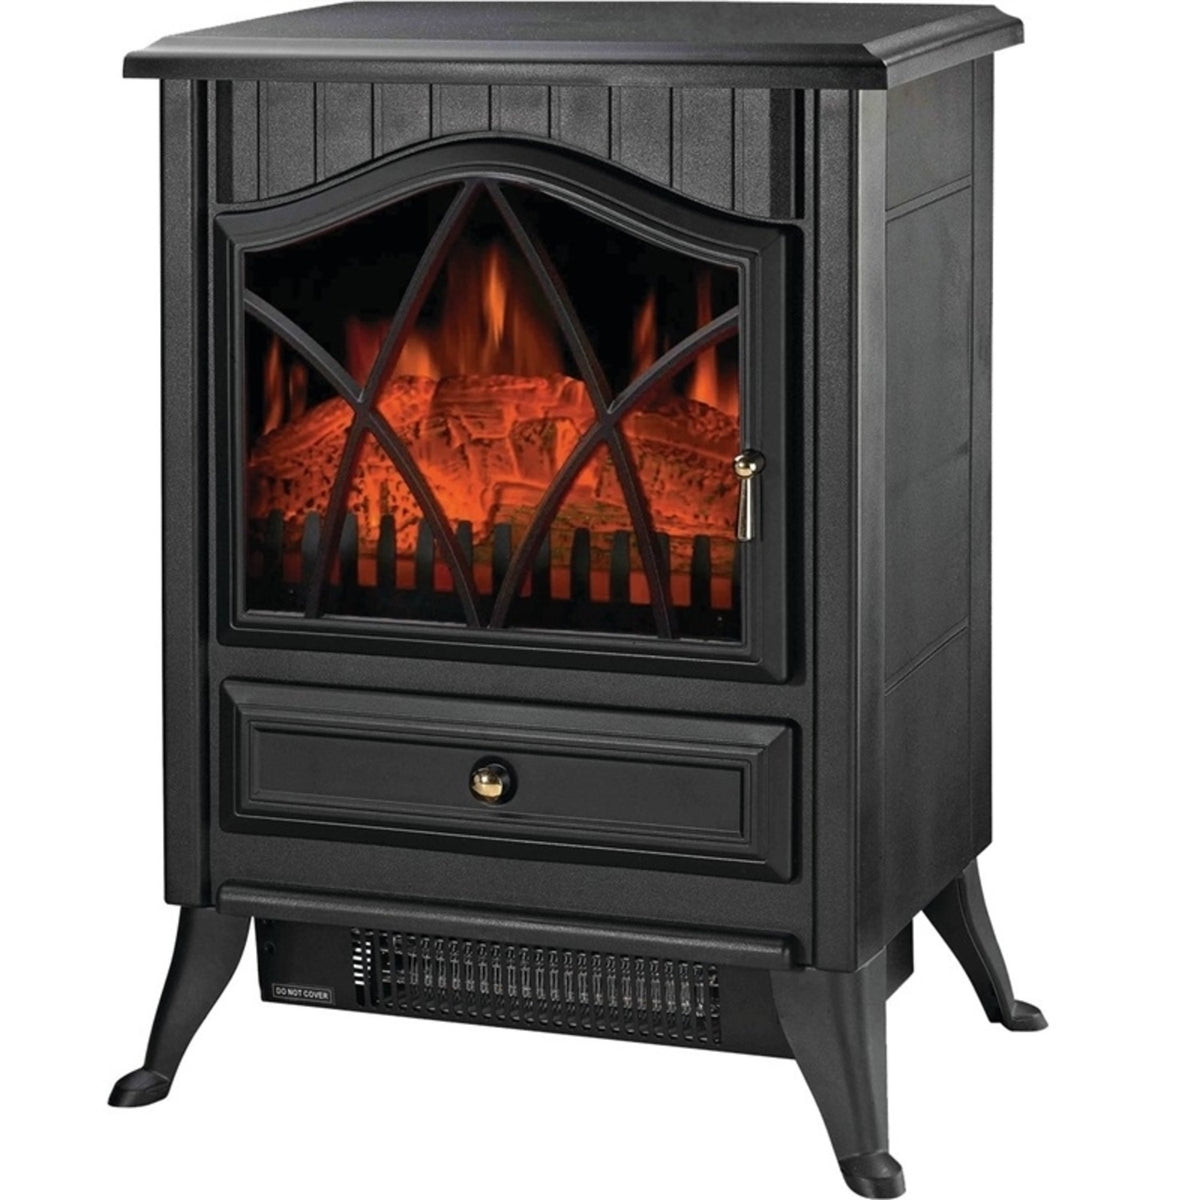 buy stoves at cheap rate in bulk. wholesale & retail fireplace goods & supplies store.